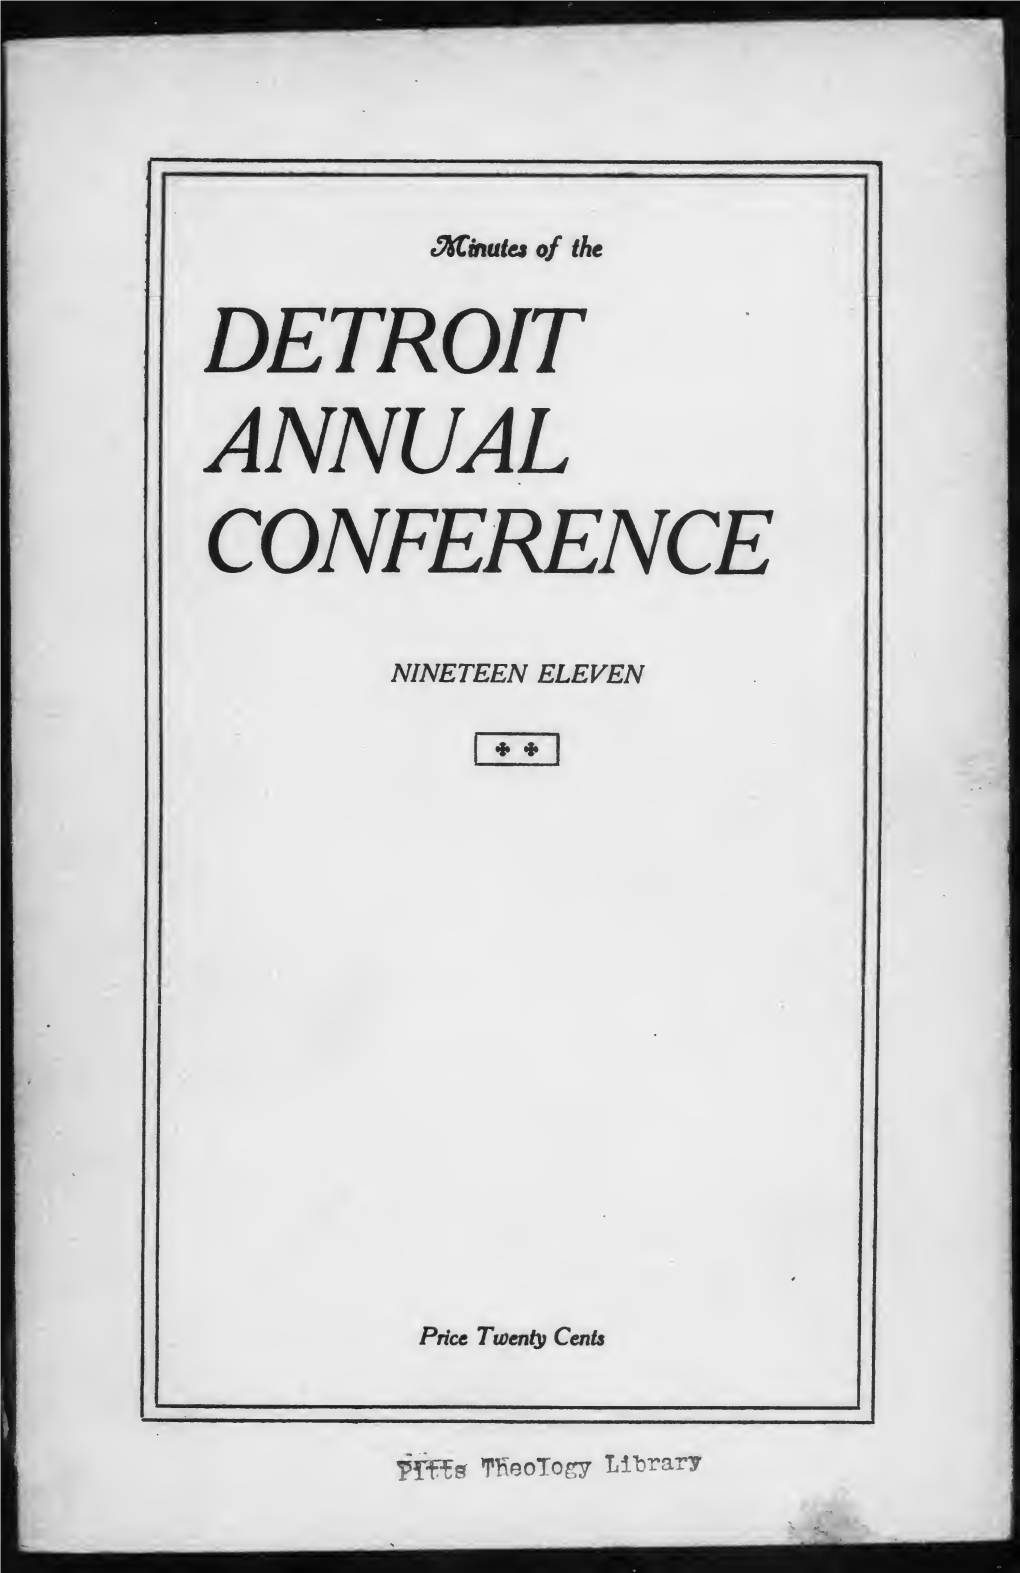 Session of the Detroit Annual Conference of the Methodist Episcopal Church